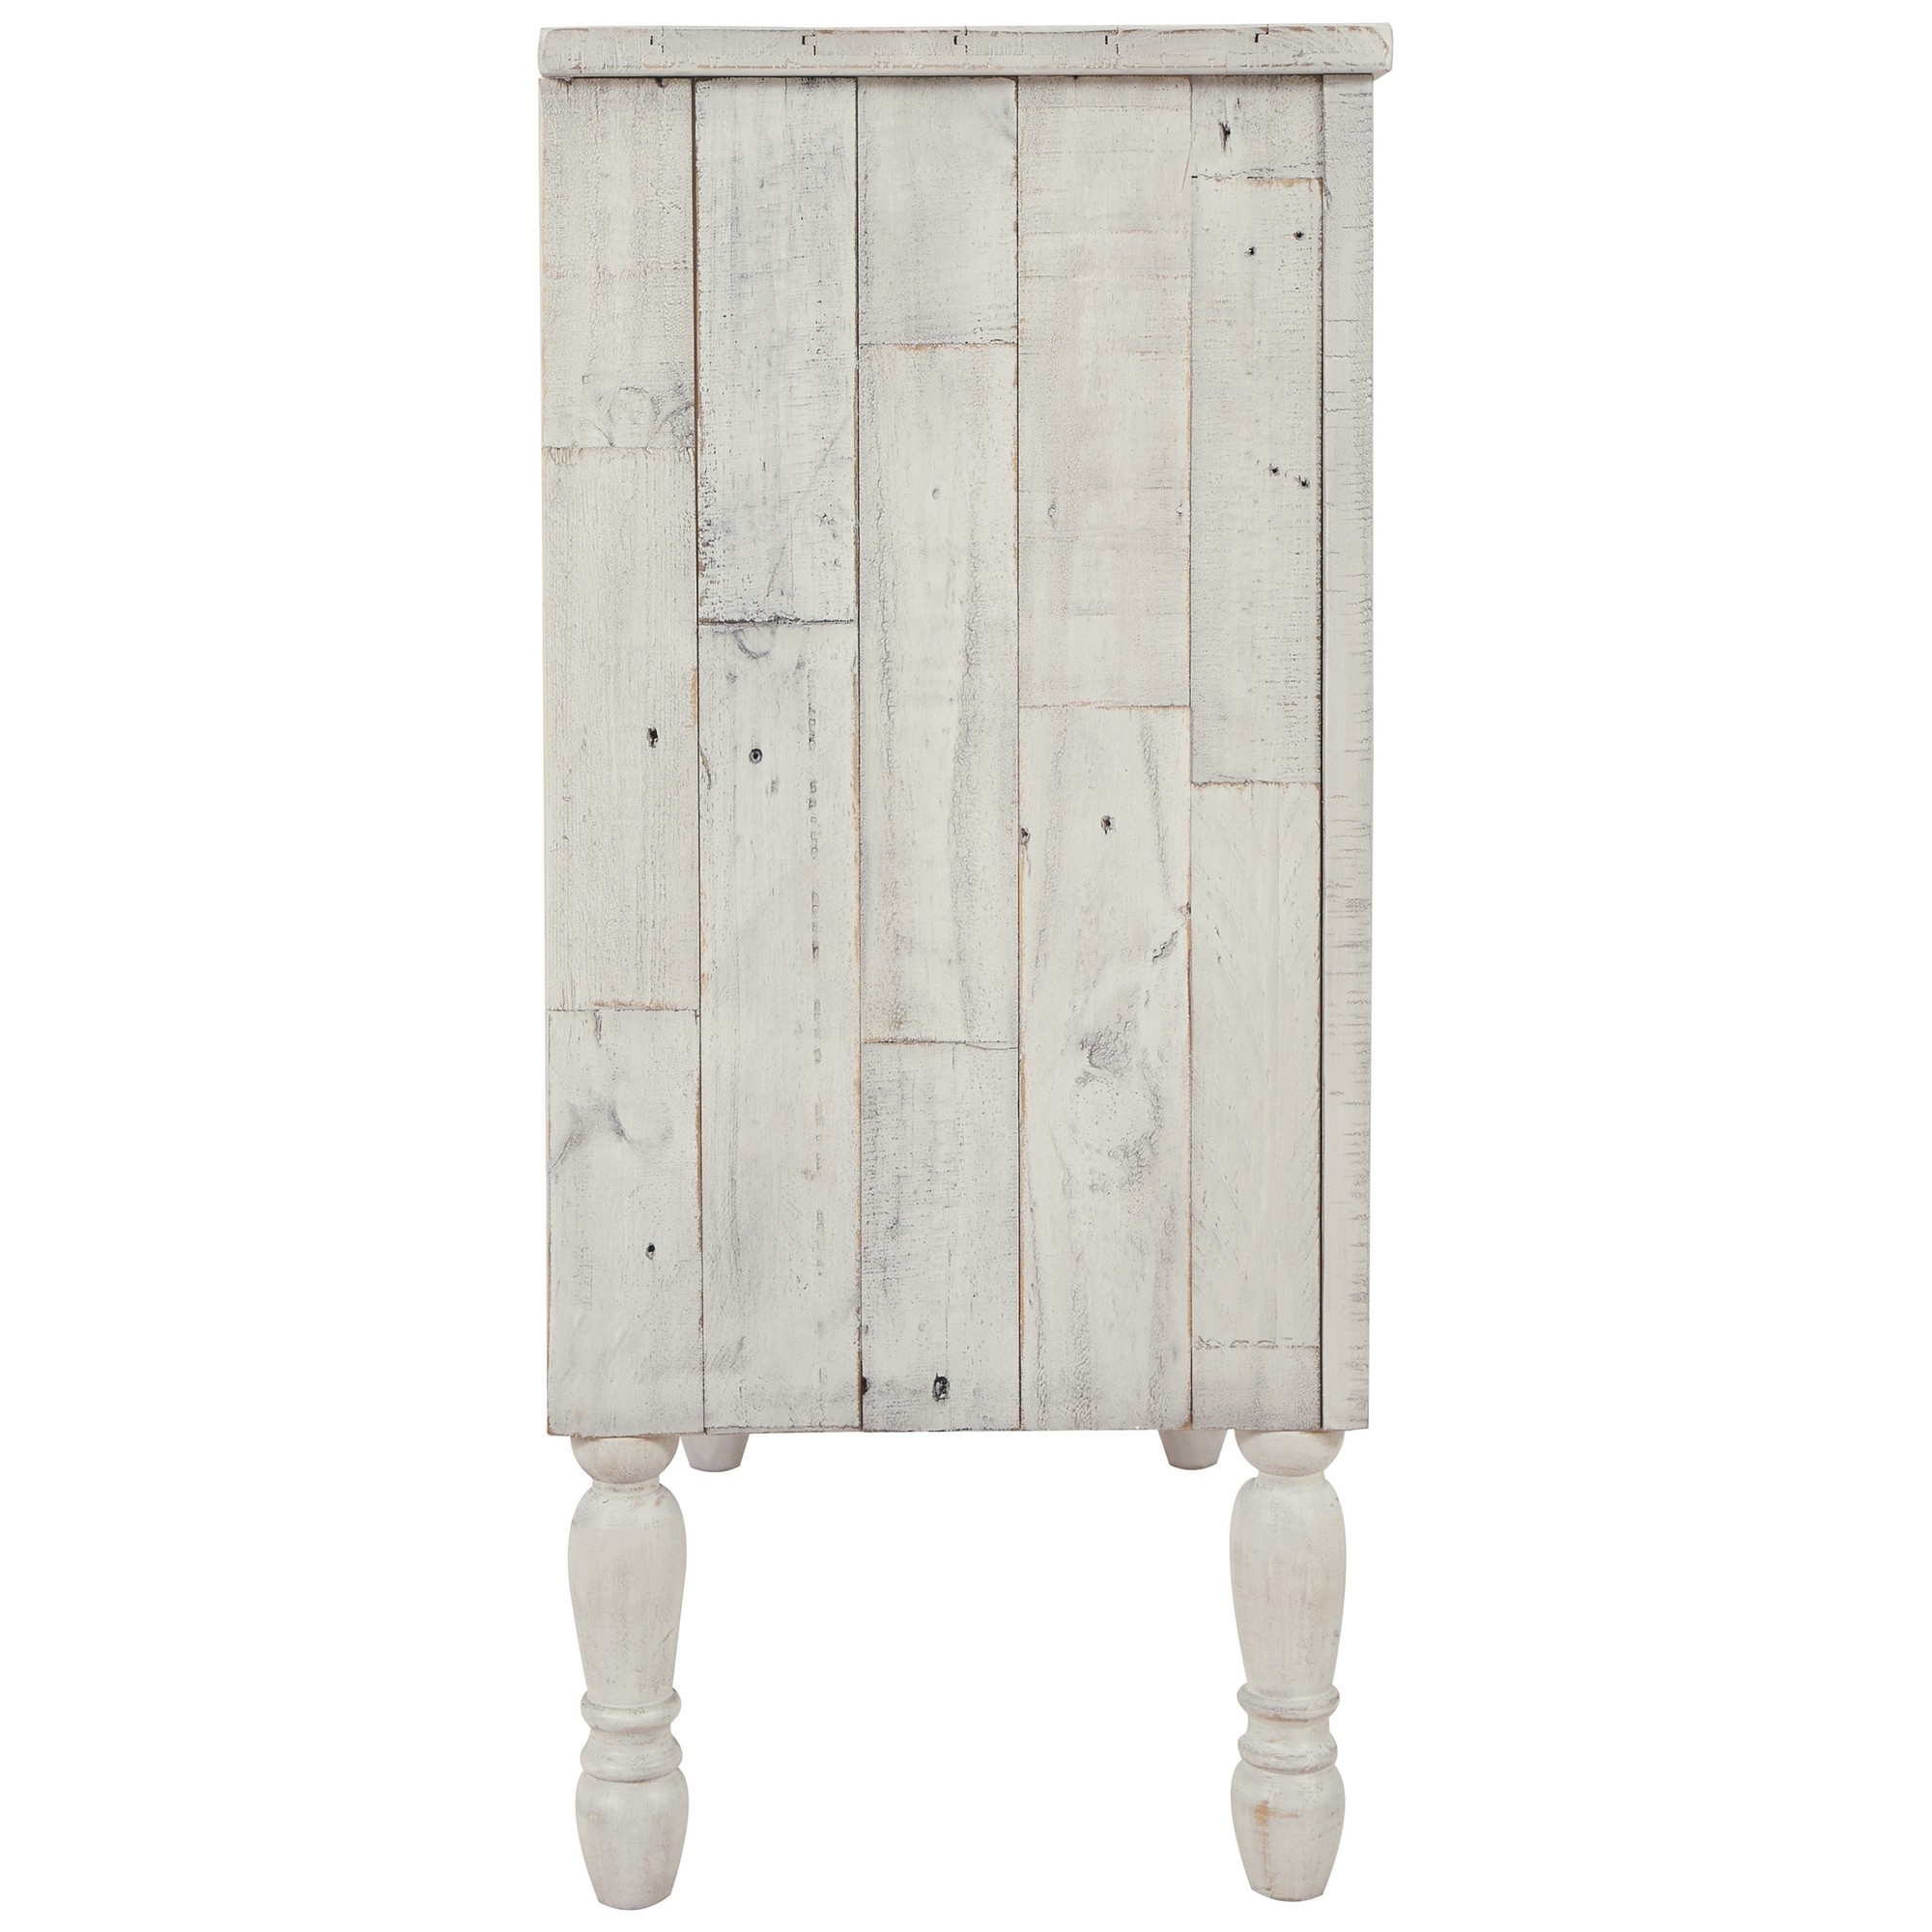 2 Glass Inlay Door Wooden Accent Cabinet with Turned Legs Antique White - Saltoro Sherpi - image 4 of 5